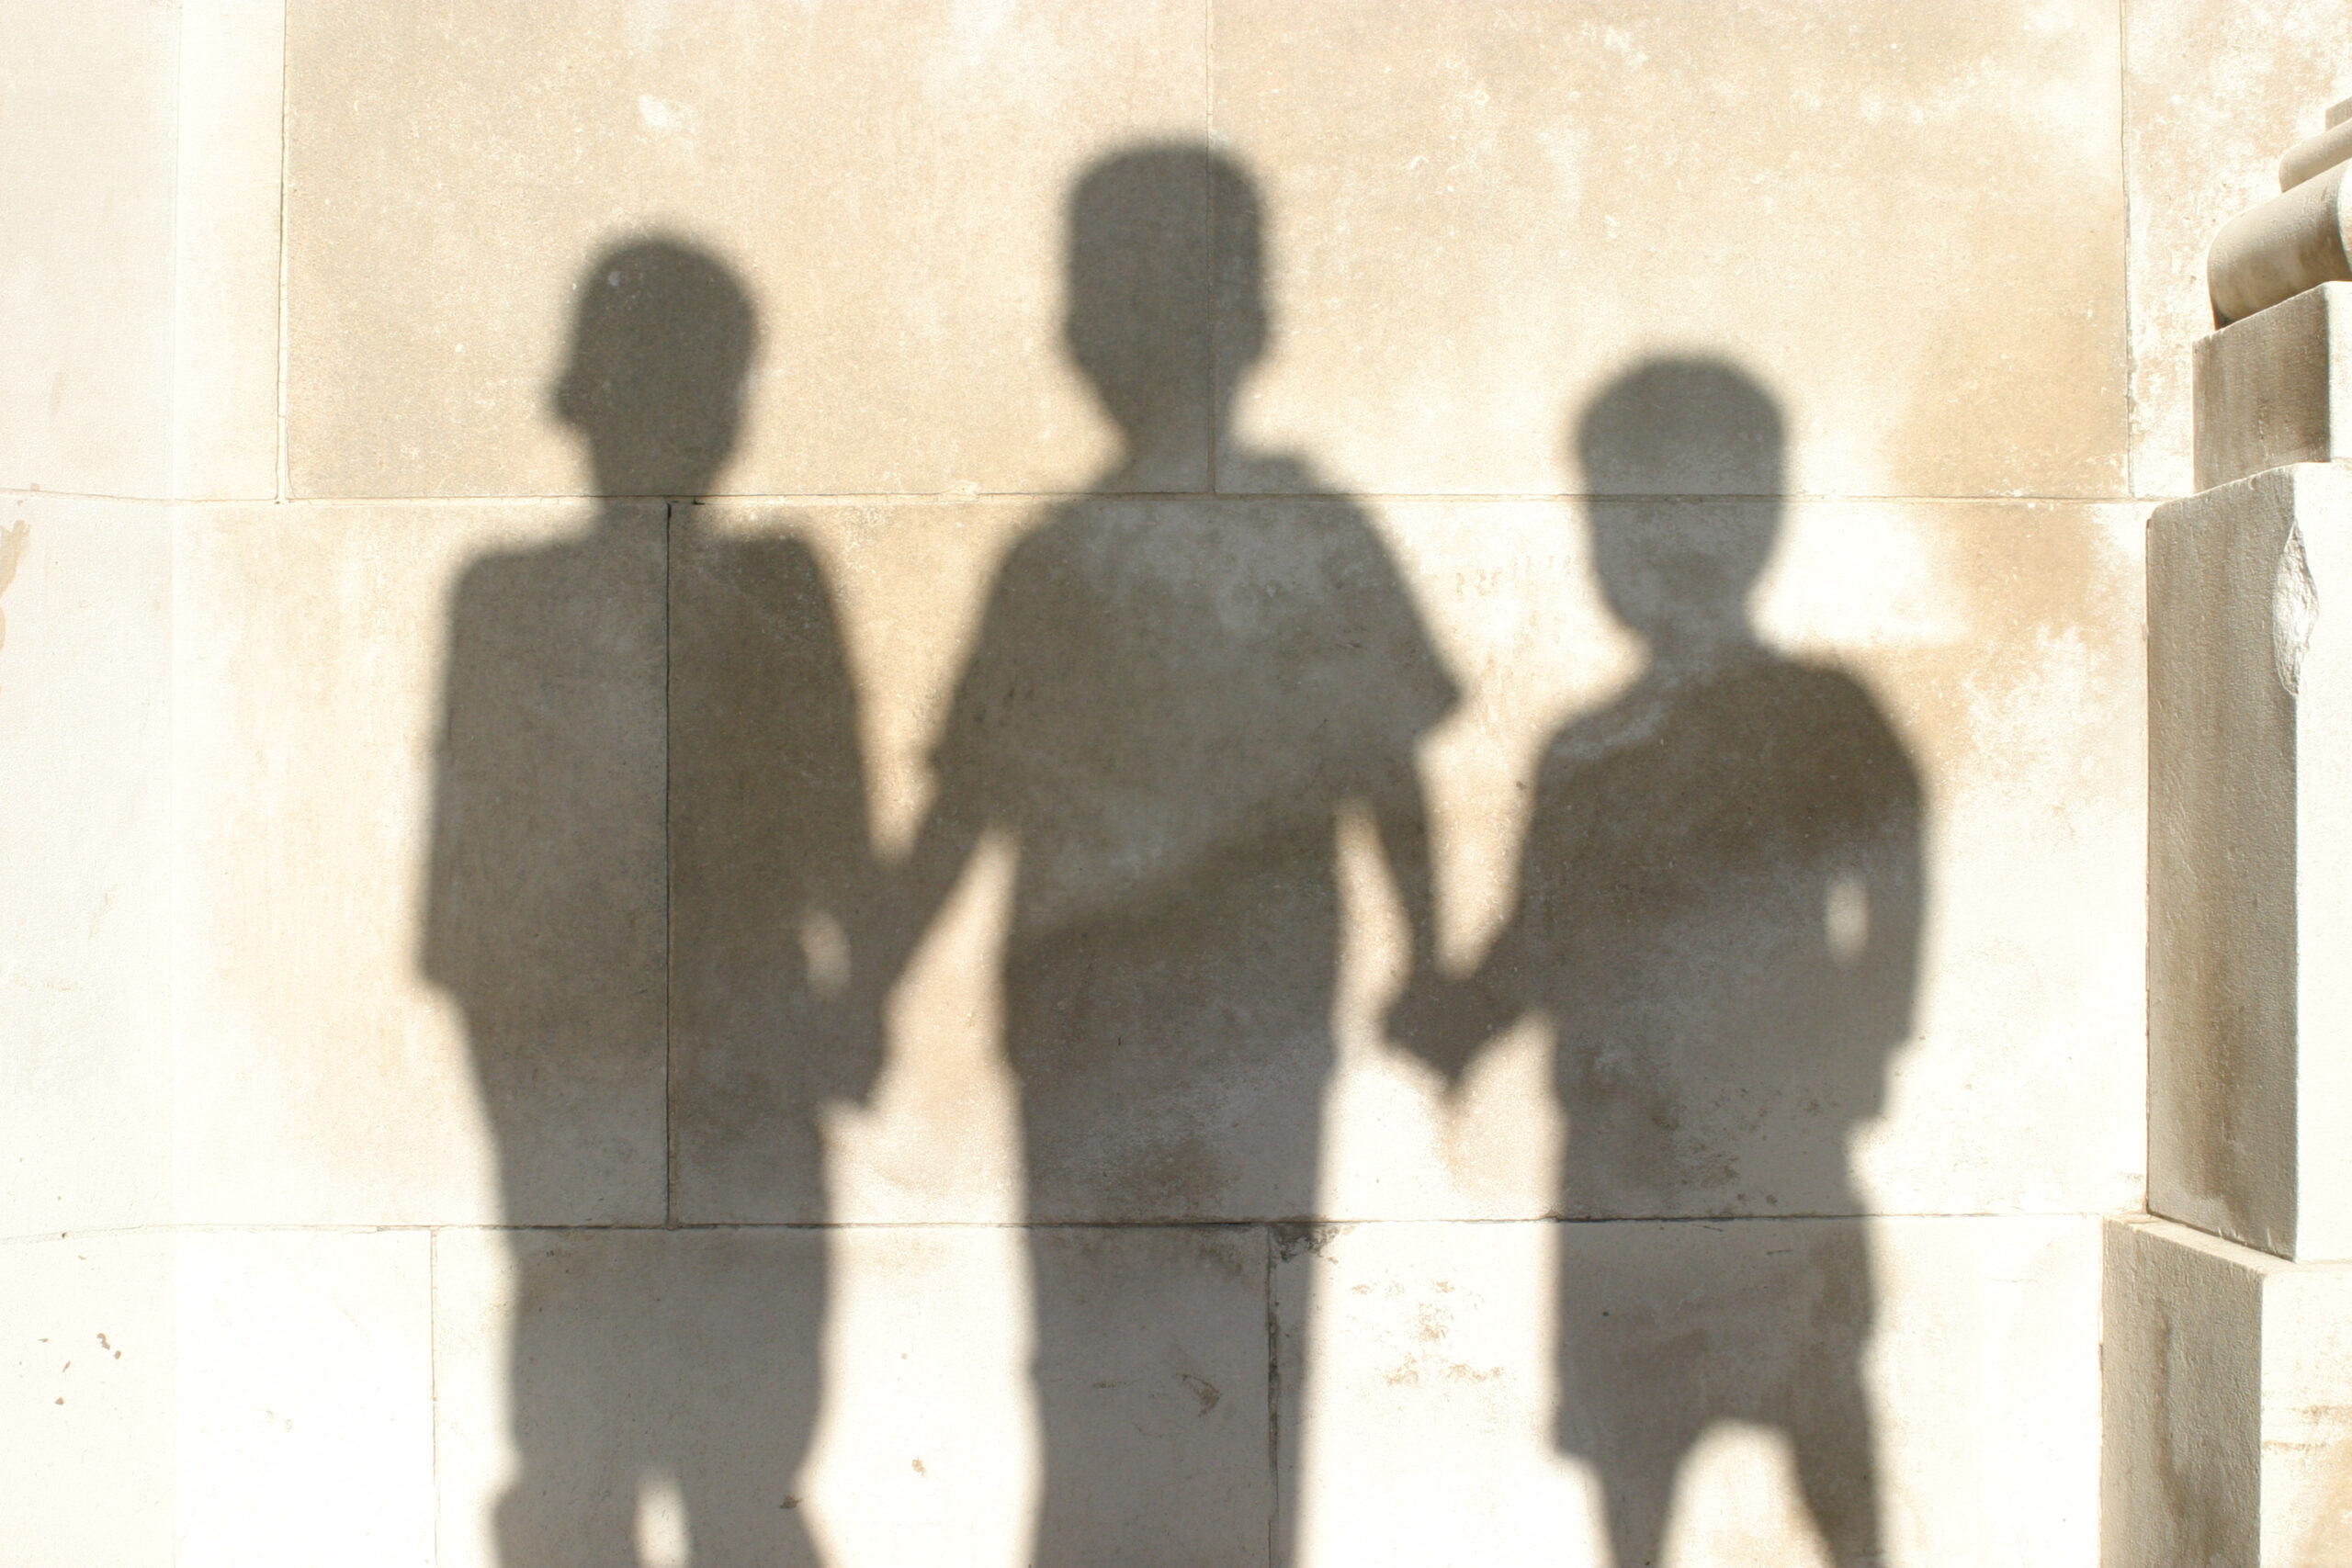 Shadows of three children holding hands, standing near a wall during the day.